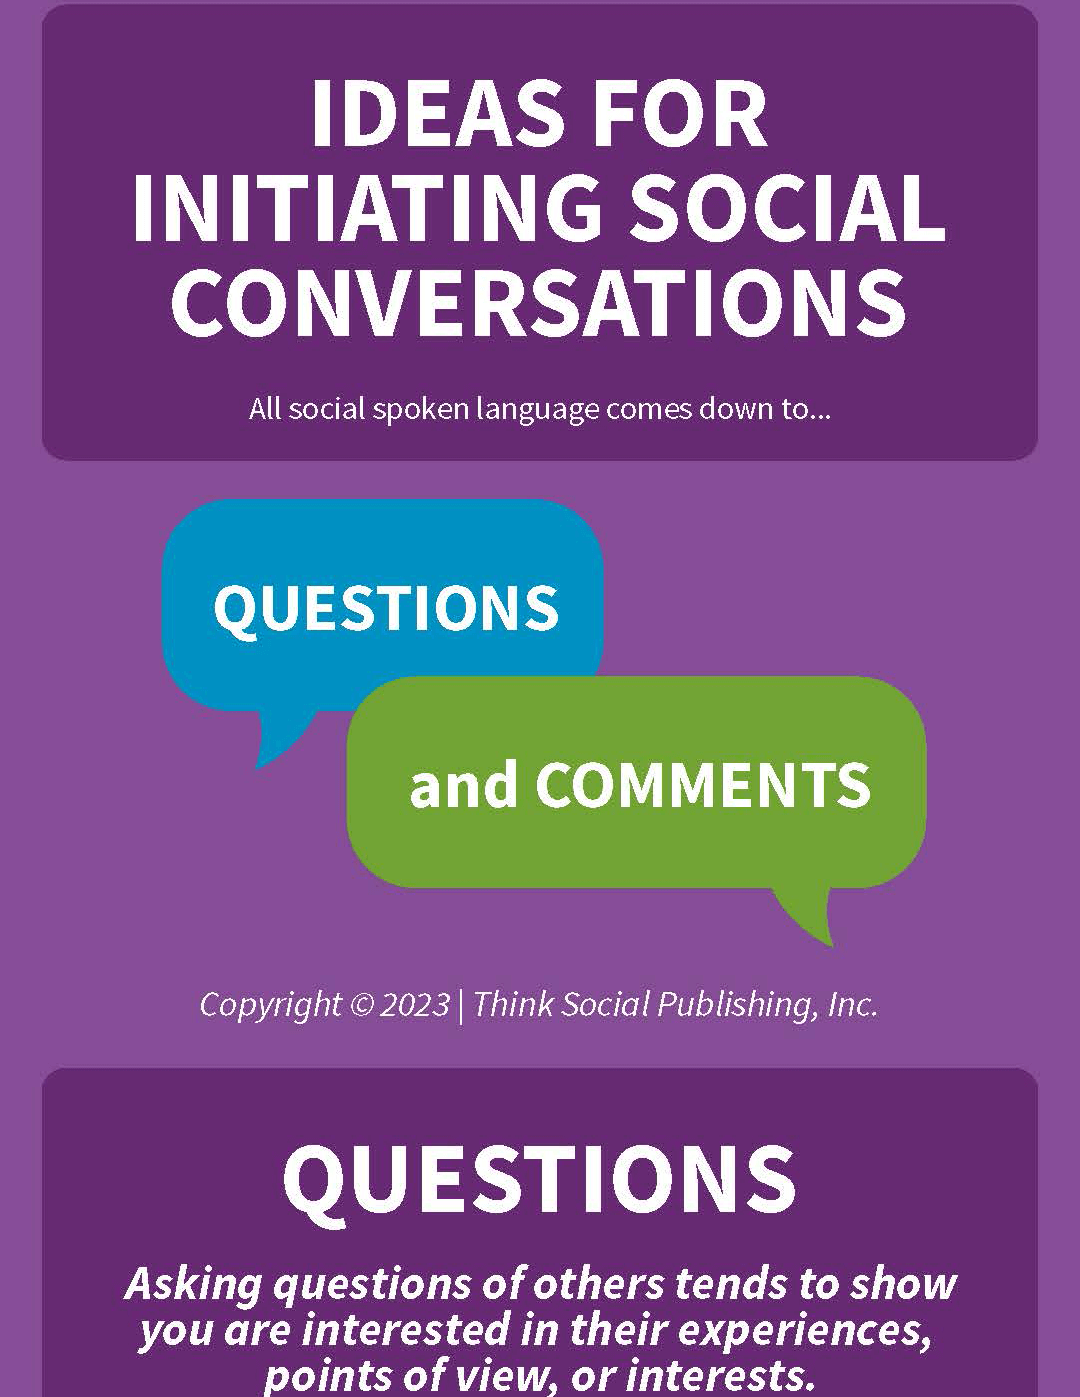 Ideas for Initiating Social Conversation